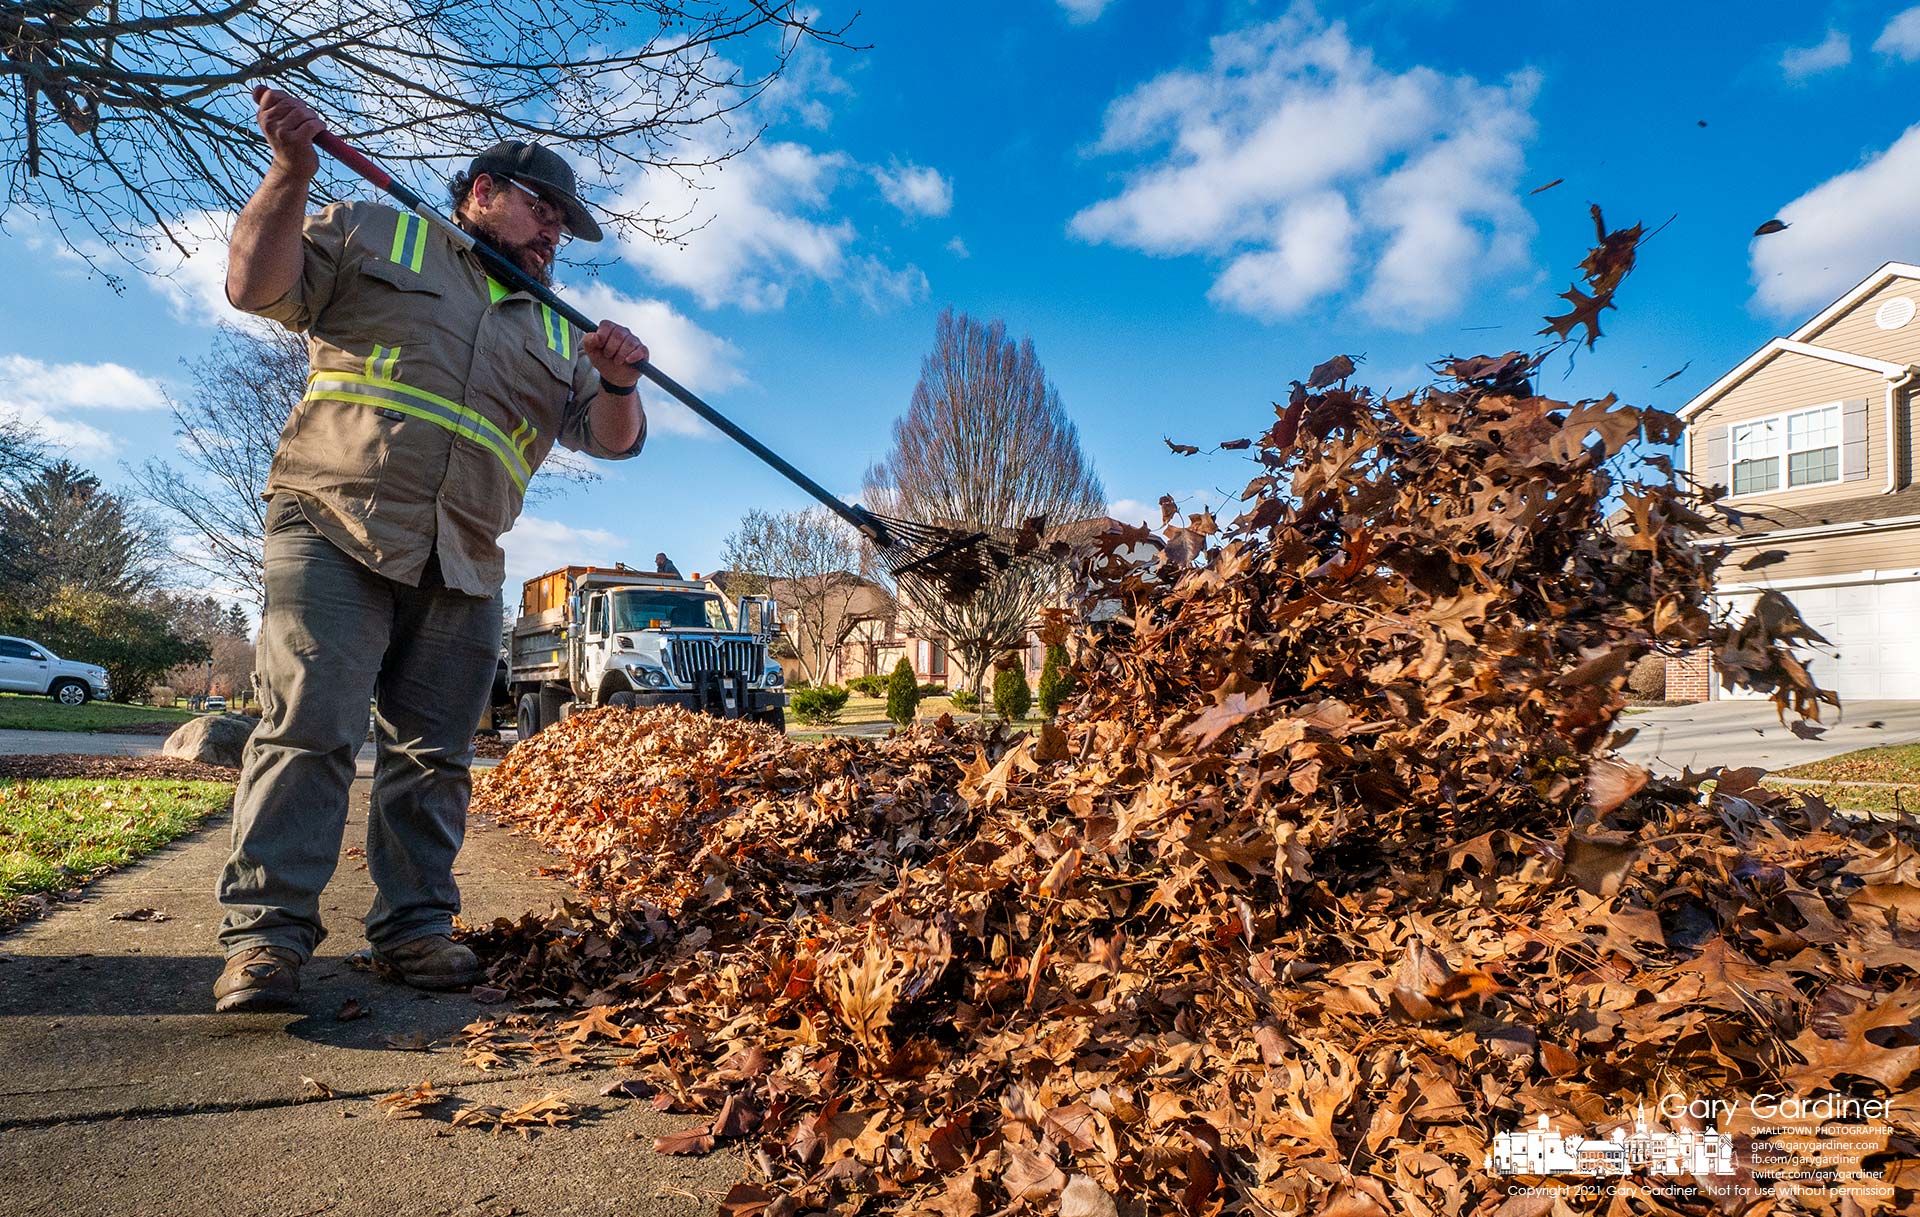 A city worker uses a rake to throw stacks of leaves to the curb so they can be vacuumed away as the city's final weeks of leaf disposal come to an end. My Final Photo for Dec. 22, 2021.